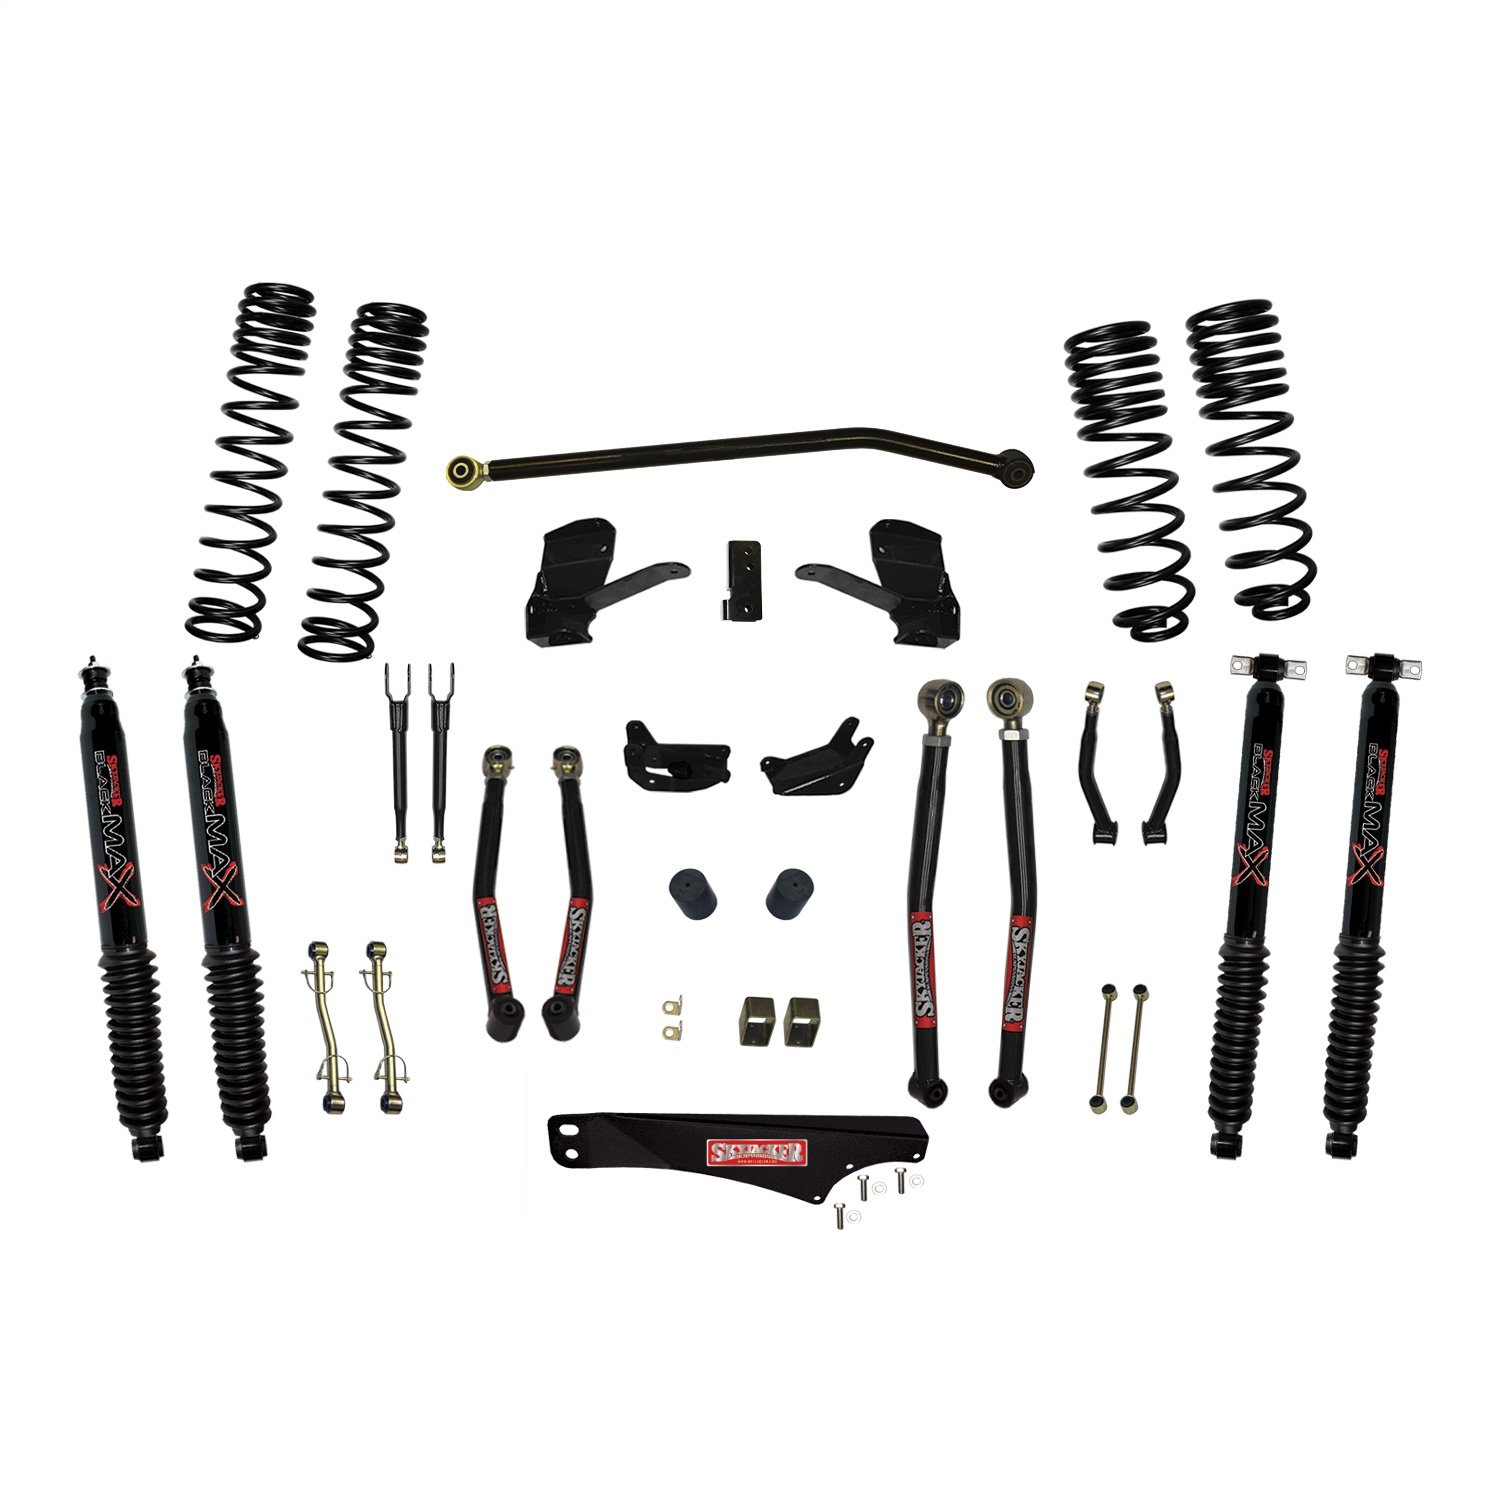 JK40LKLT-SXB Front and Rear Suspension Lift Kit, Lift Amount: 4 in. Front/4 in. Rear